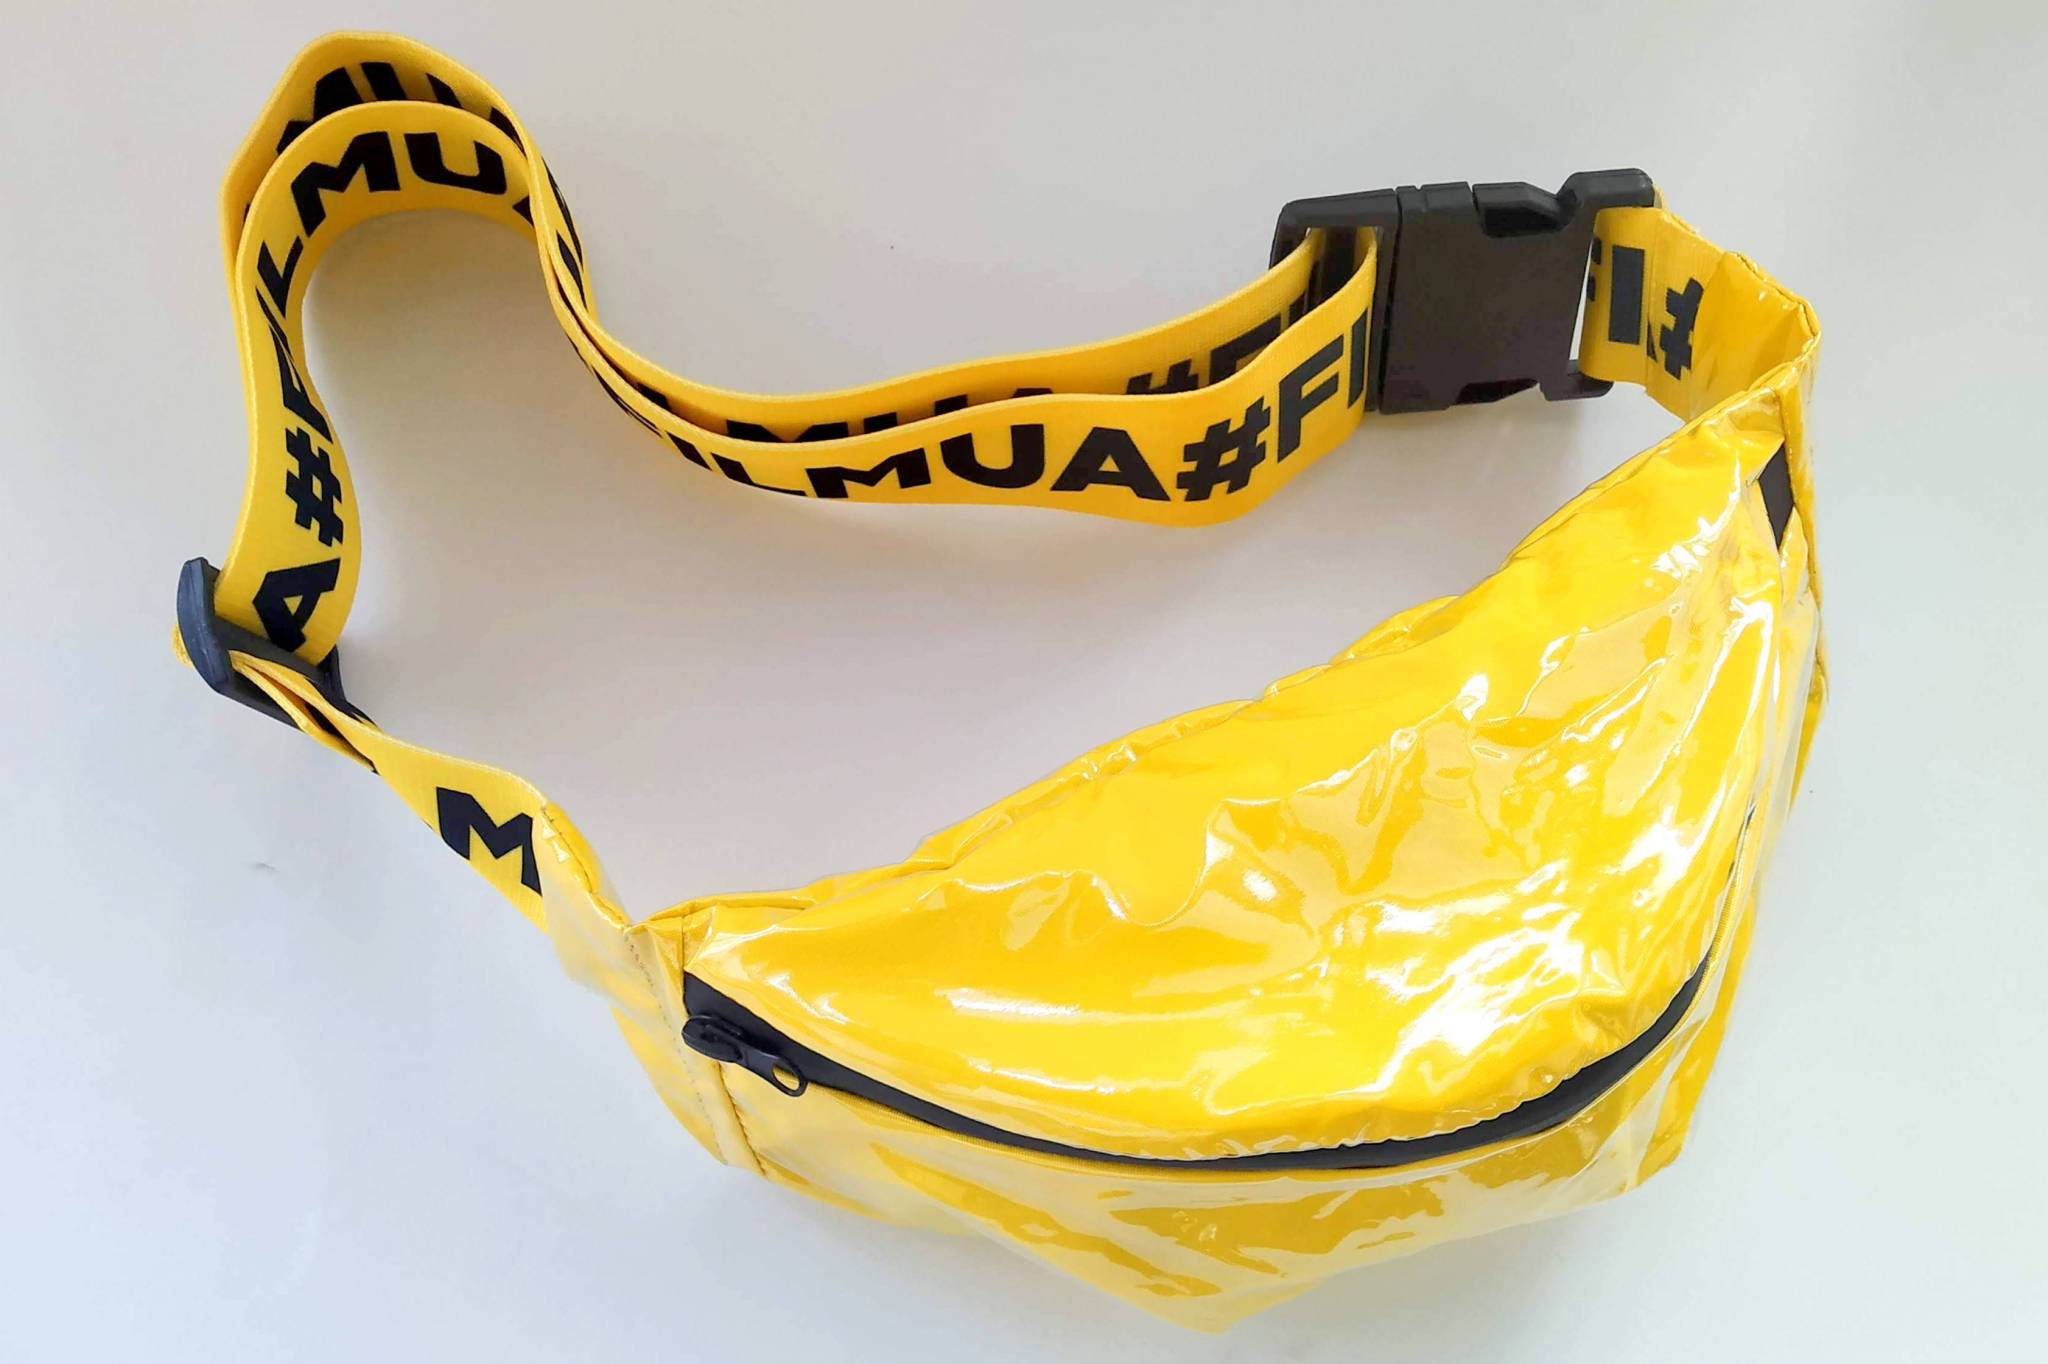 Branded Fanny Pack #FILMUA (Yellow color)